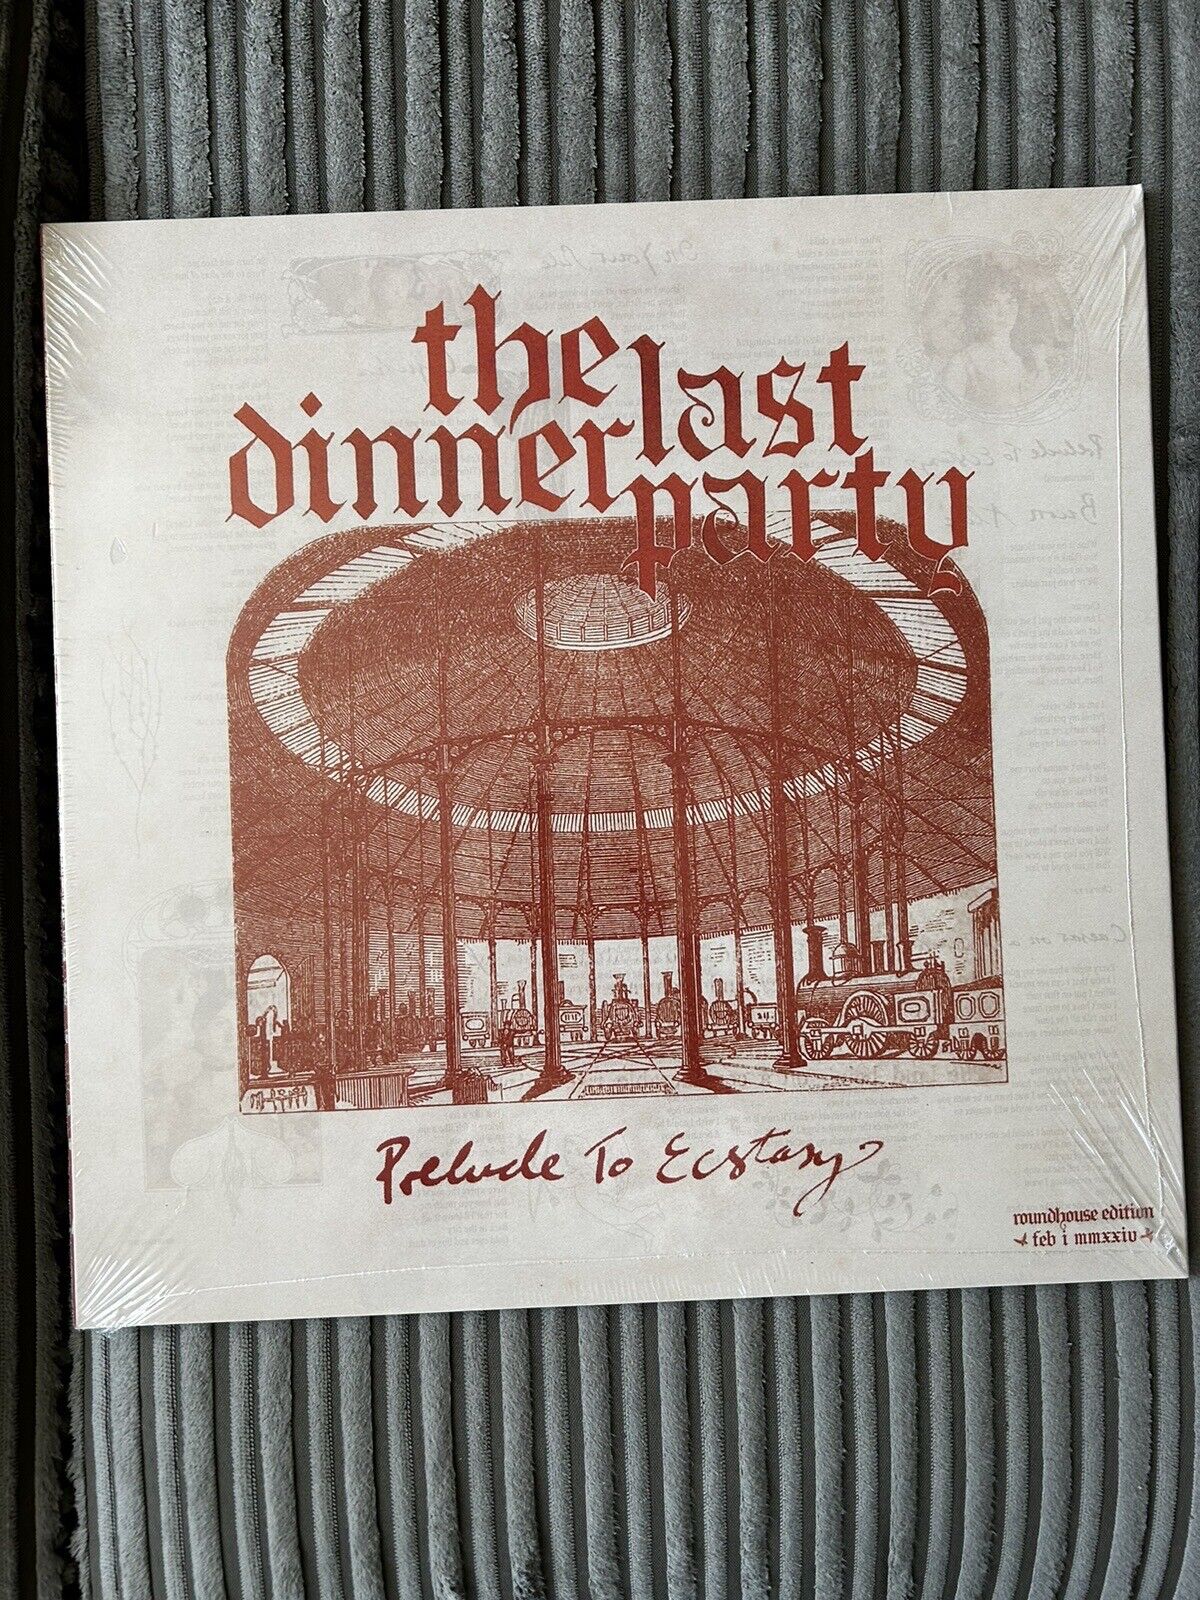 THE LAST DINNER PARTY Prelude To Ecstasy RARE ROUNDHOUSE EDITION LP & CD Sealed